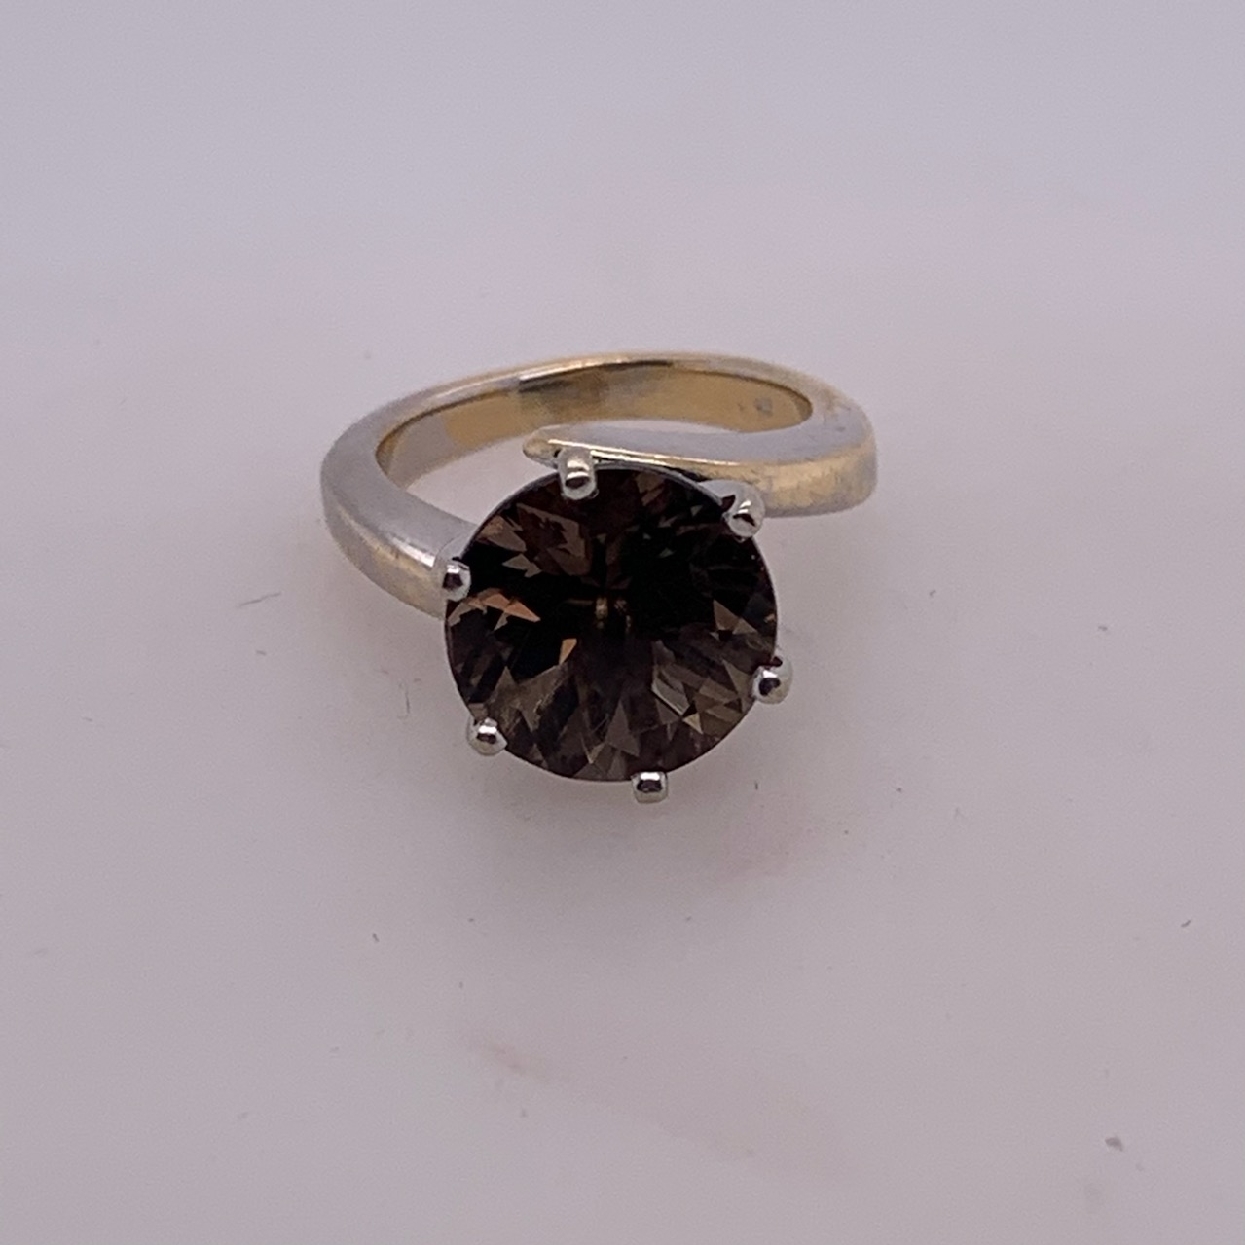 14K Yellow Gold Bypass Style Ring with Large Smokey Quartz

Size 5.5